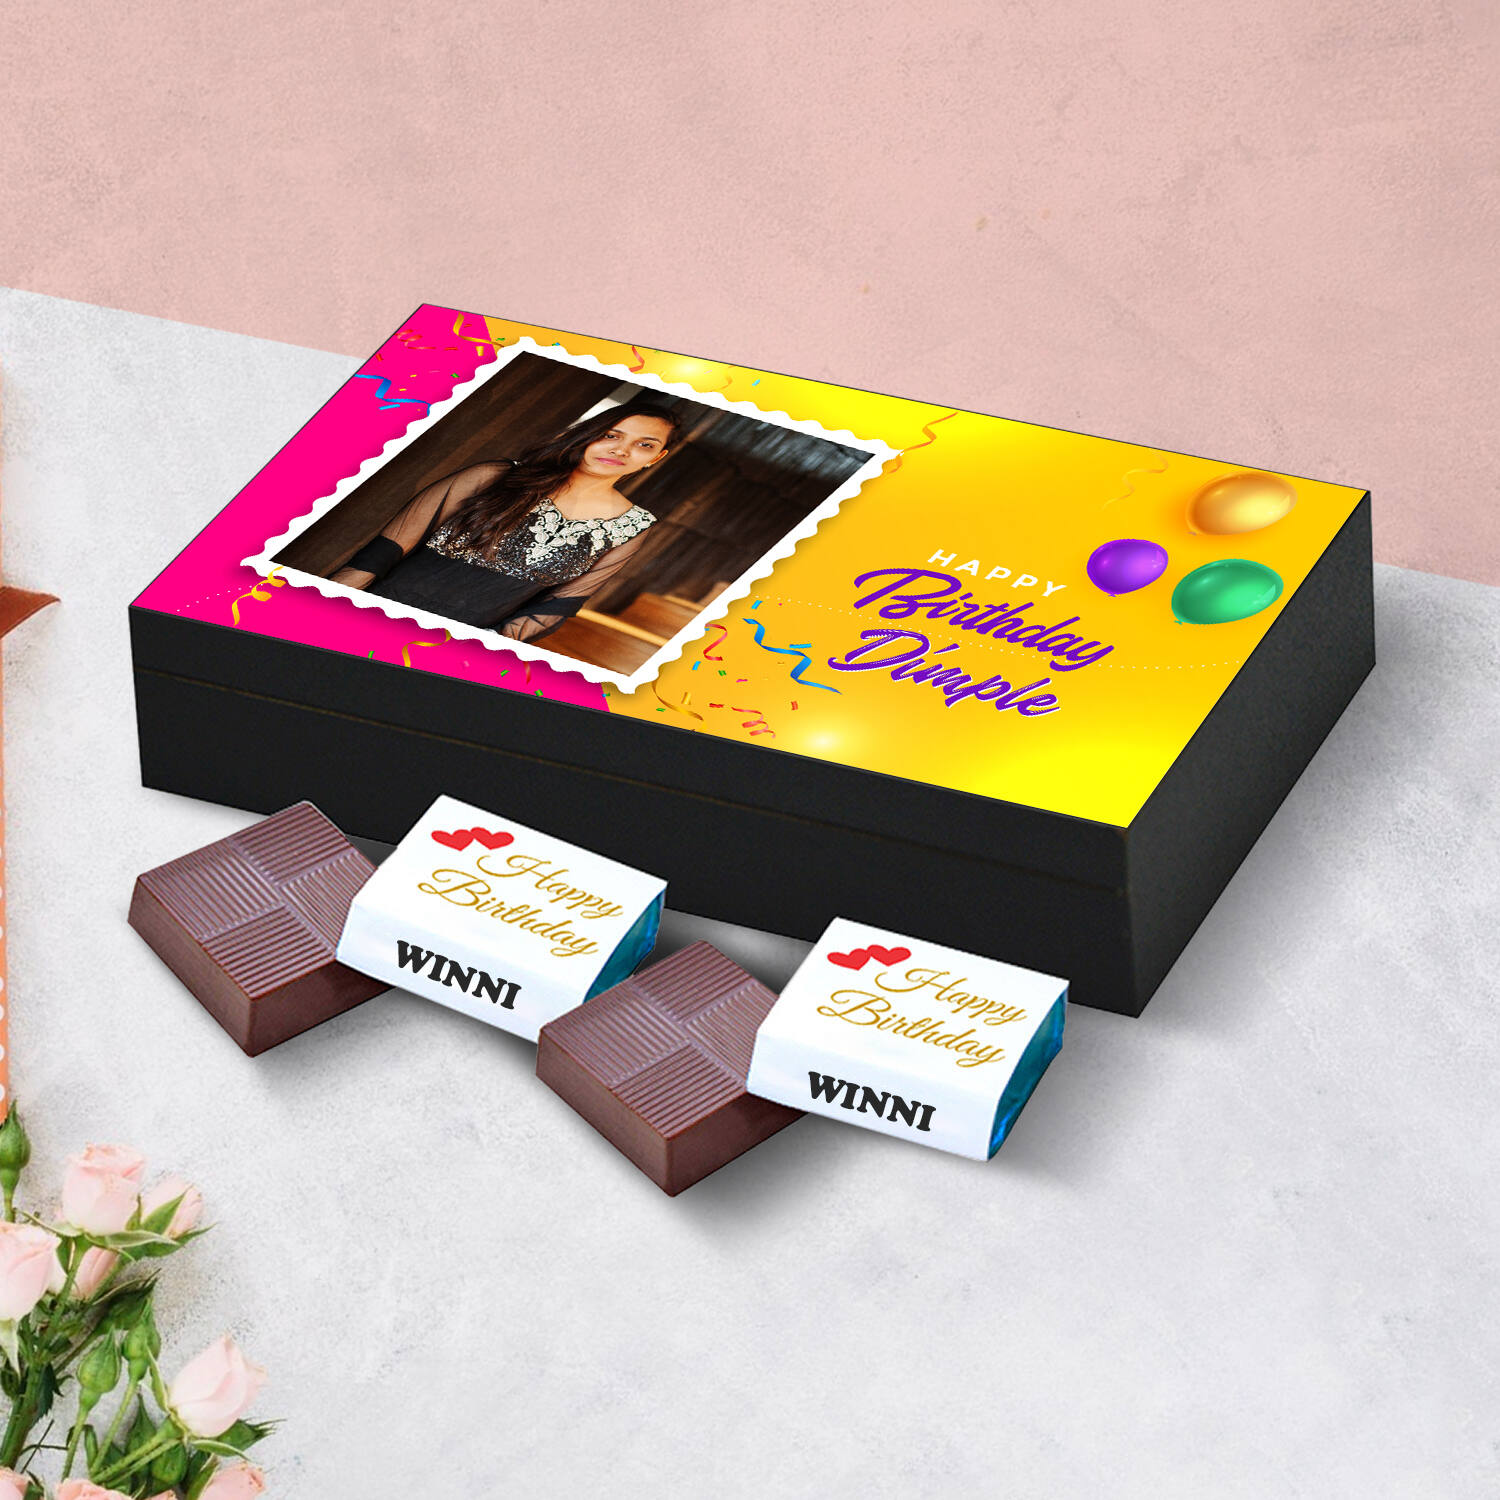 Memorable Best Friend Gifts: Celebrate Your Bond with Thoughtful Gestures -  Humanitive Retail Pvt. Ltd.